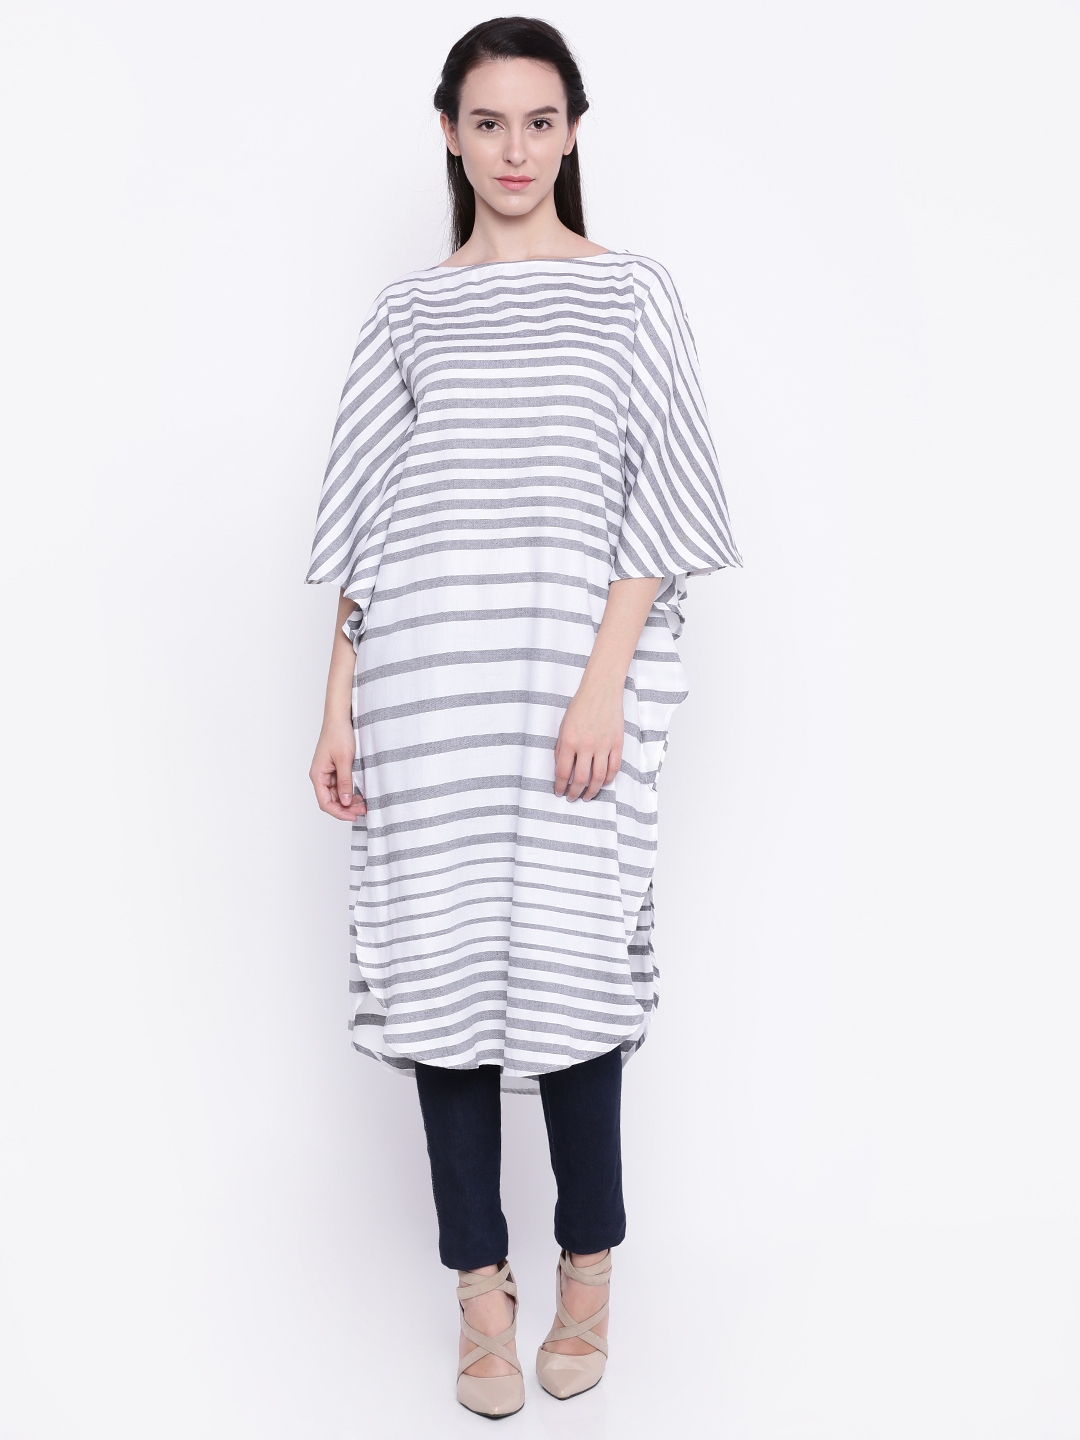 Buy AND White & Grey Striped Tunic - Tunics for Women 1822837 | Myntra